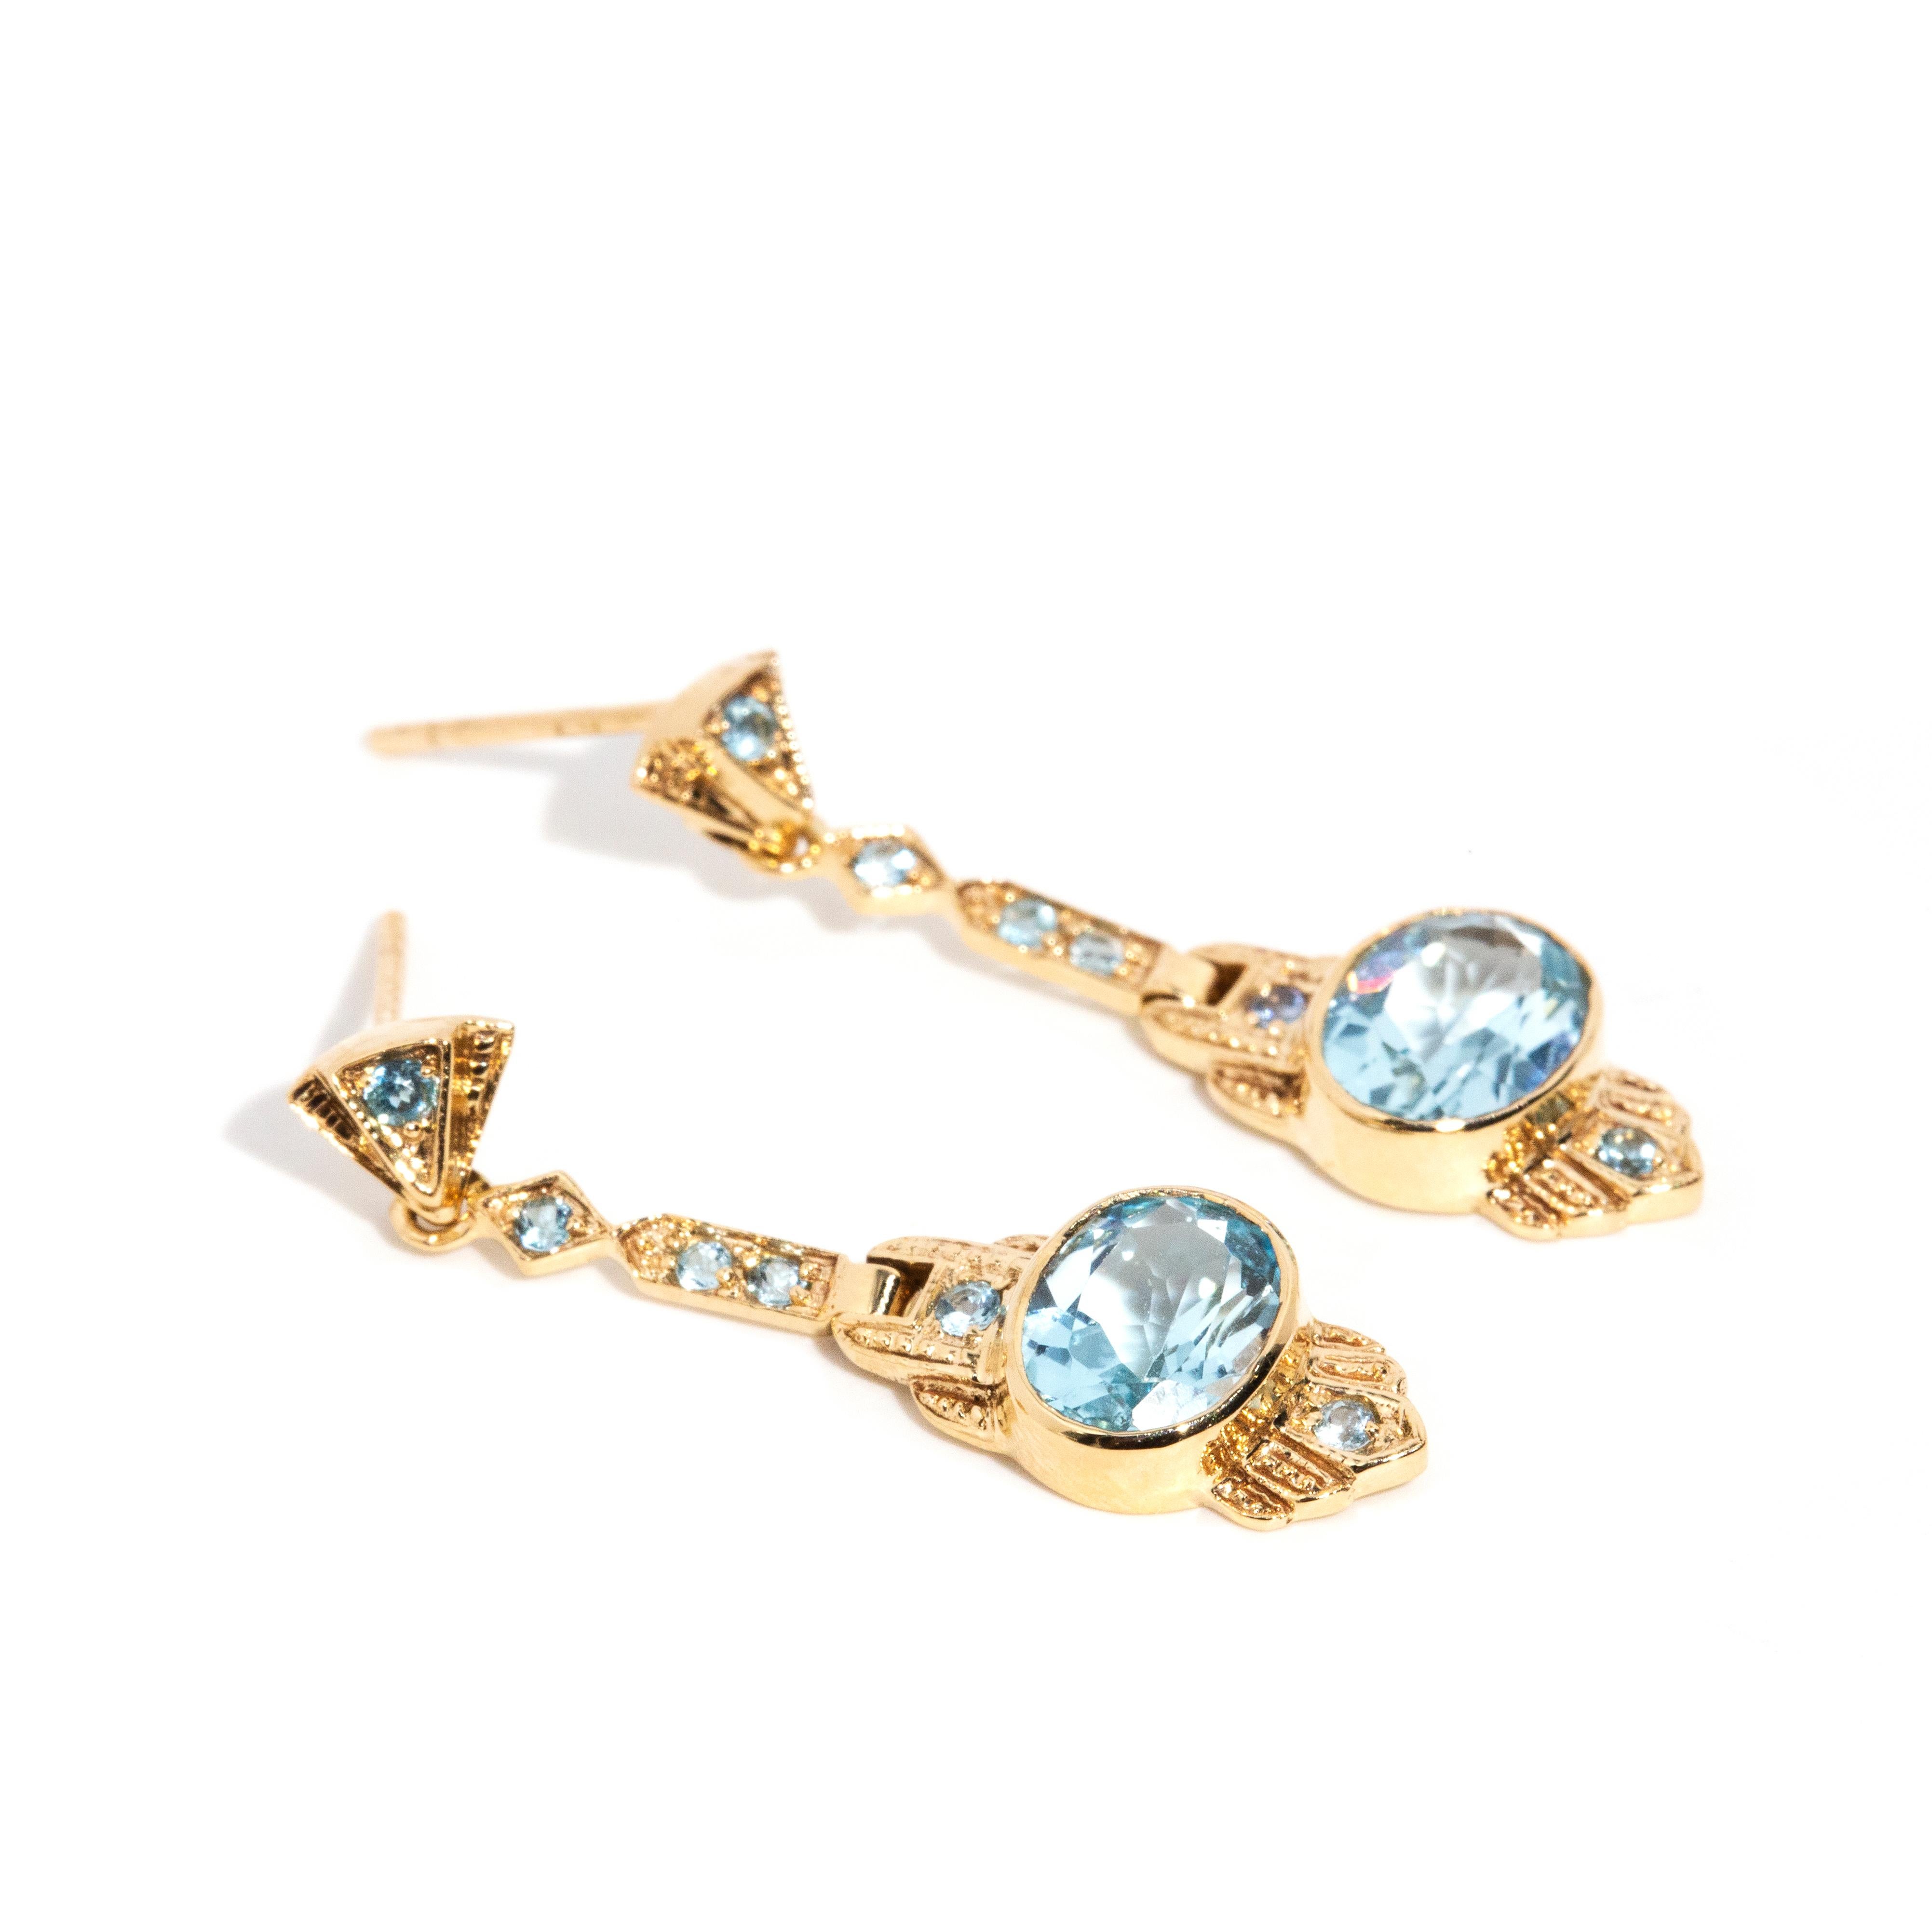 Vintage Inspired Bright Blue Topaz Art Deco Style Drop Earrings 9 Carat Gold In New Condition For Sale In Hamilton, AU